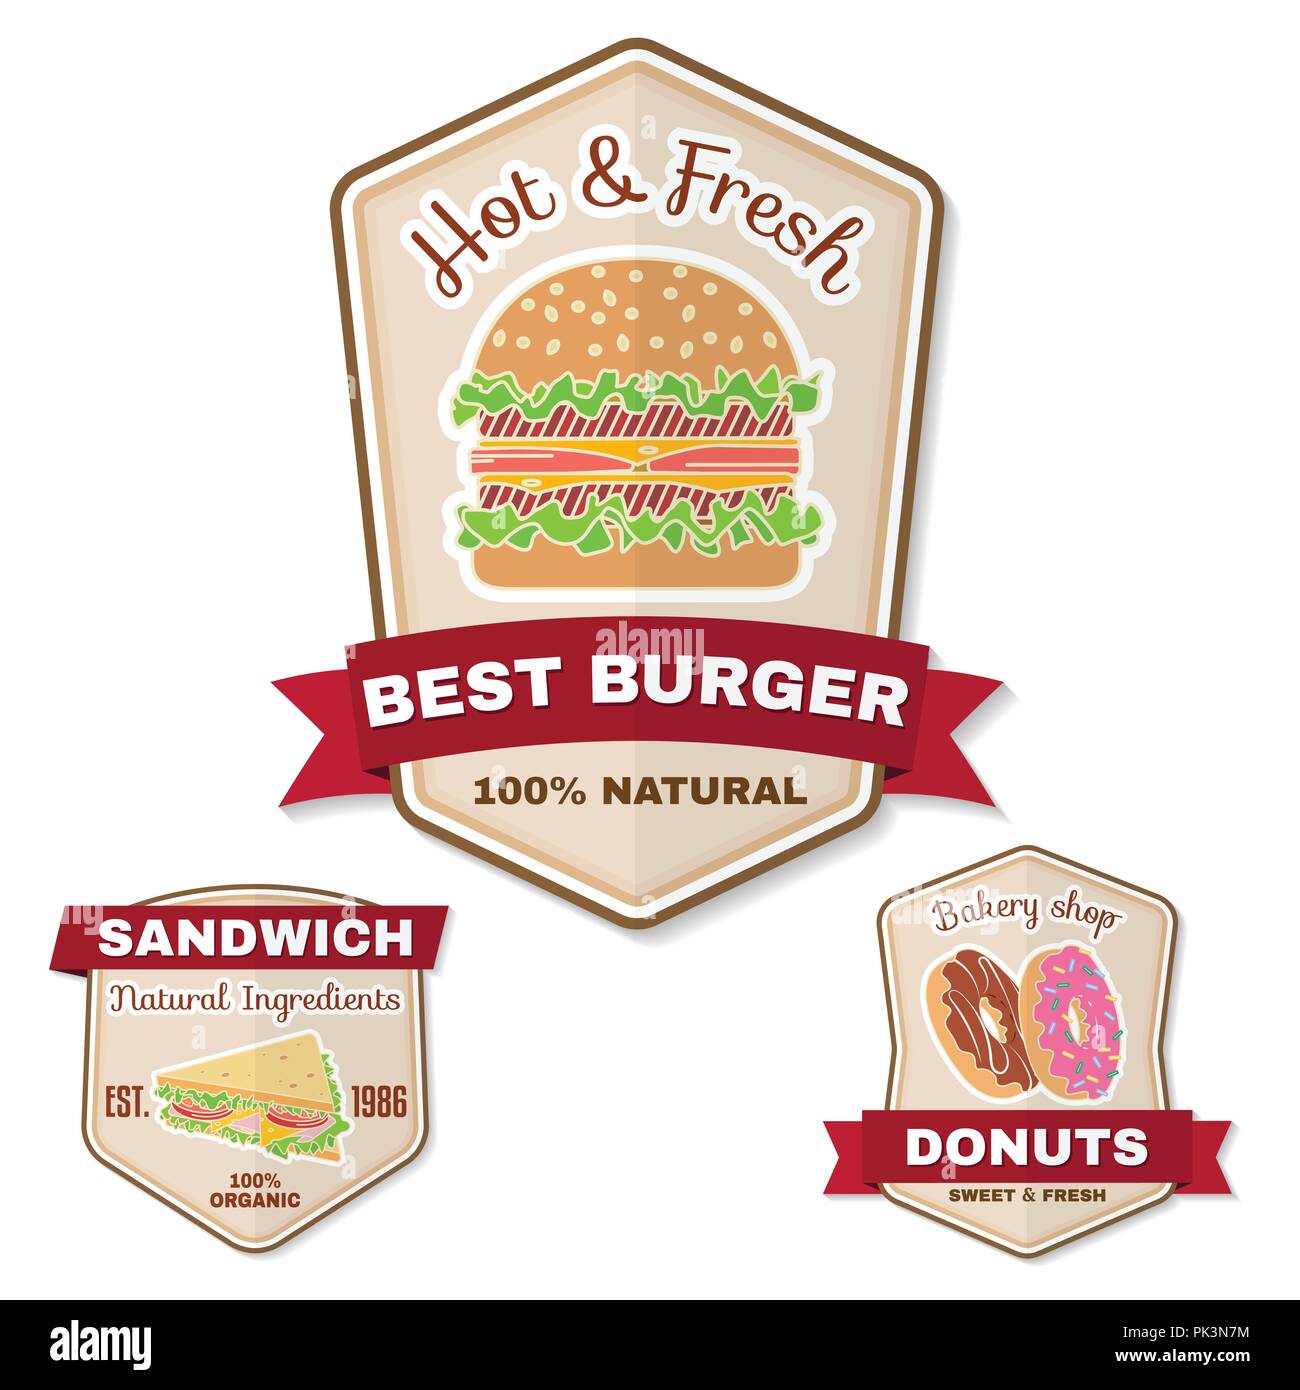 Vintage fast food badge, banner or logo emblem. Elements on the theme of the fast food business. Hamburger, sandwich, donuts, design, sticker or emble Stock Vector